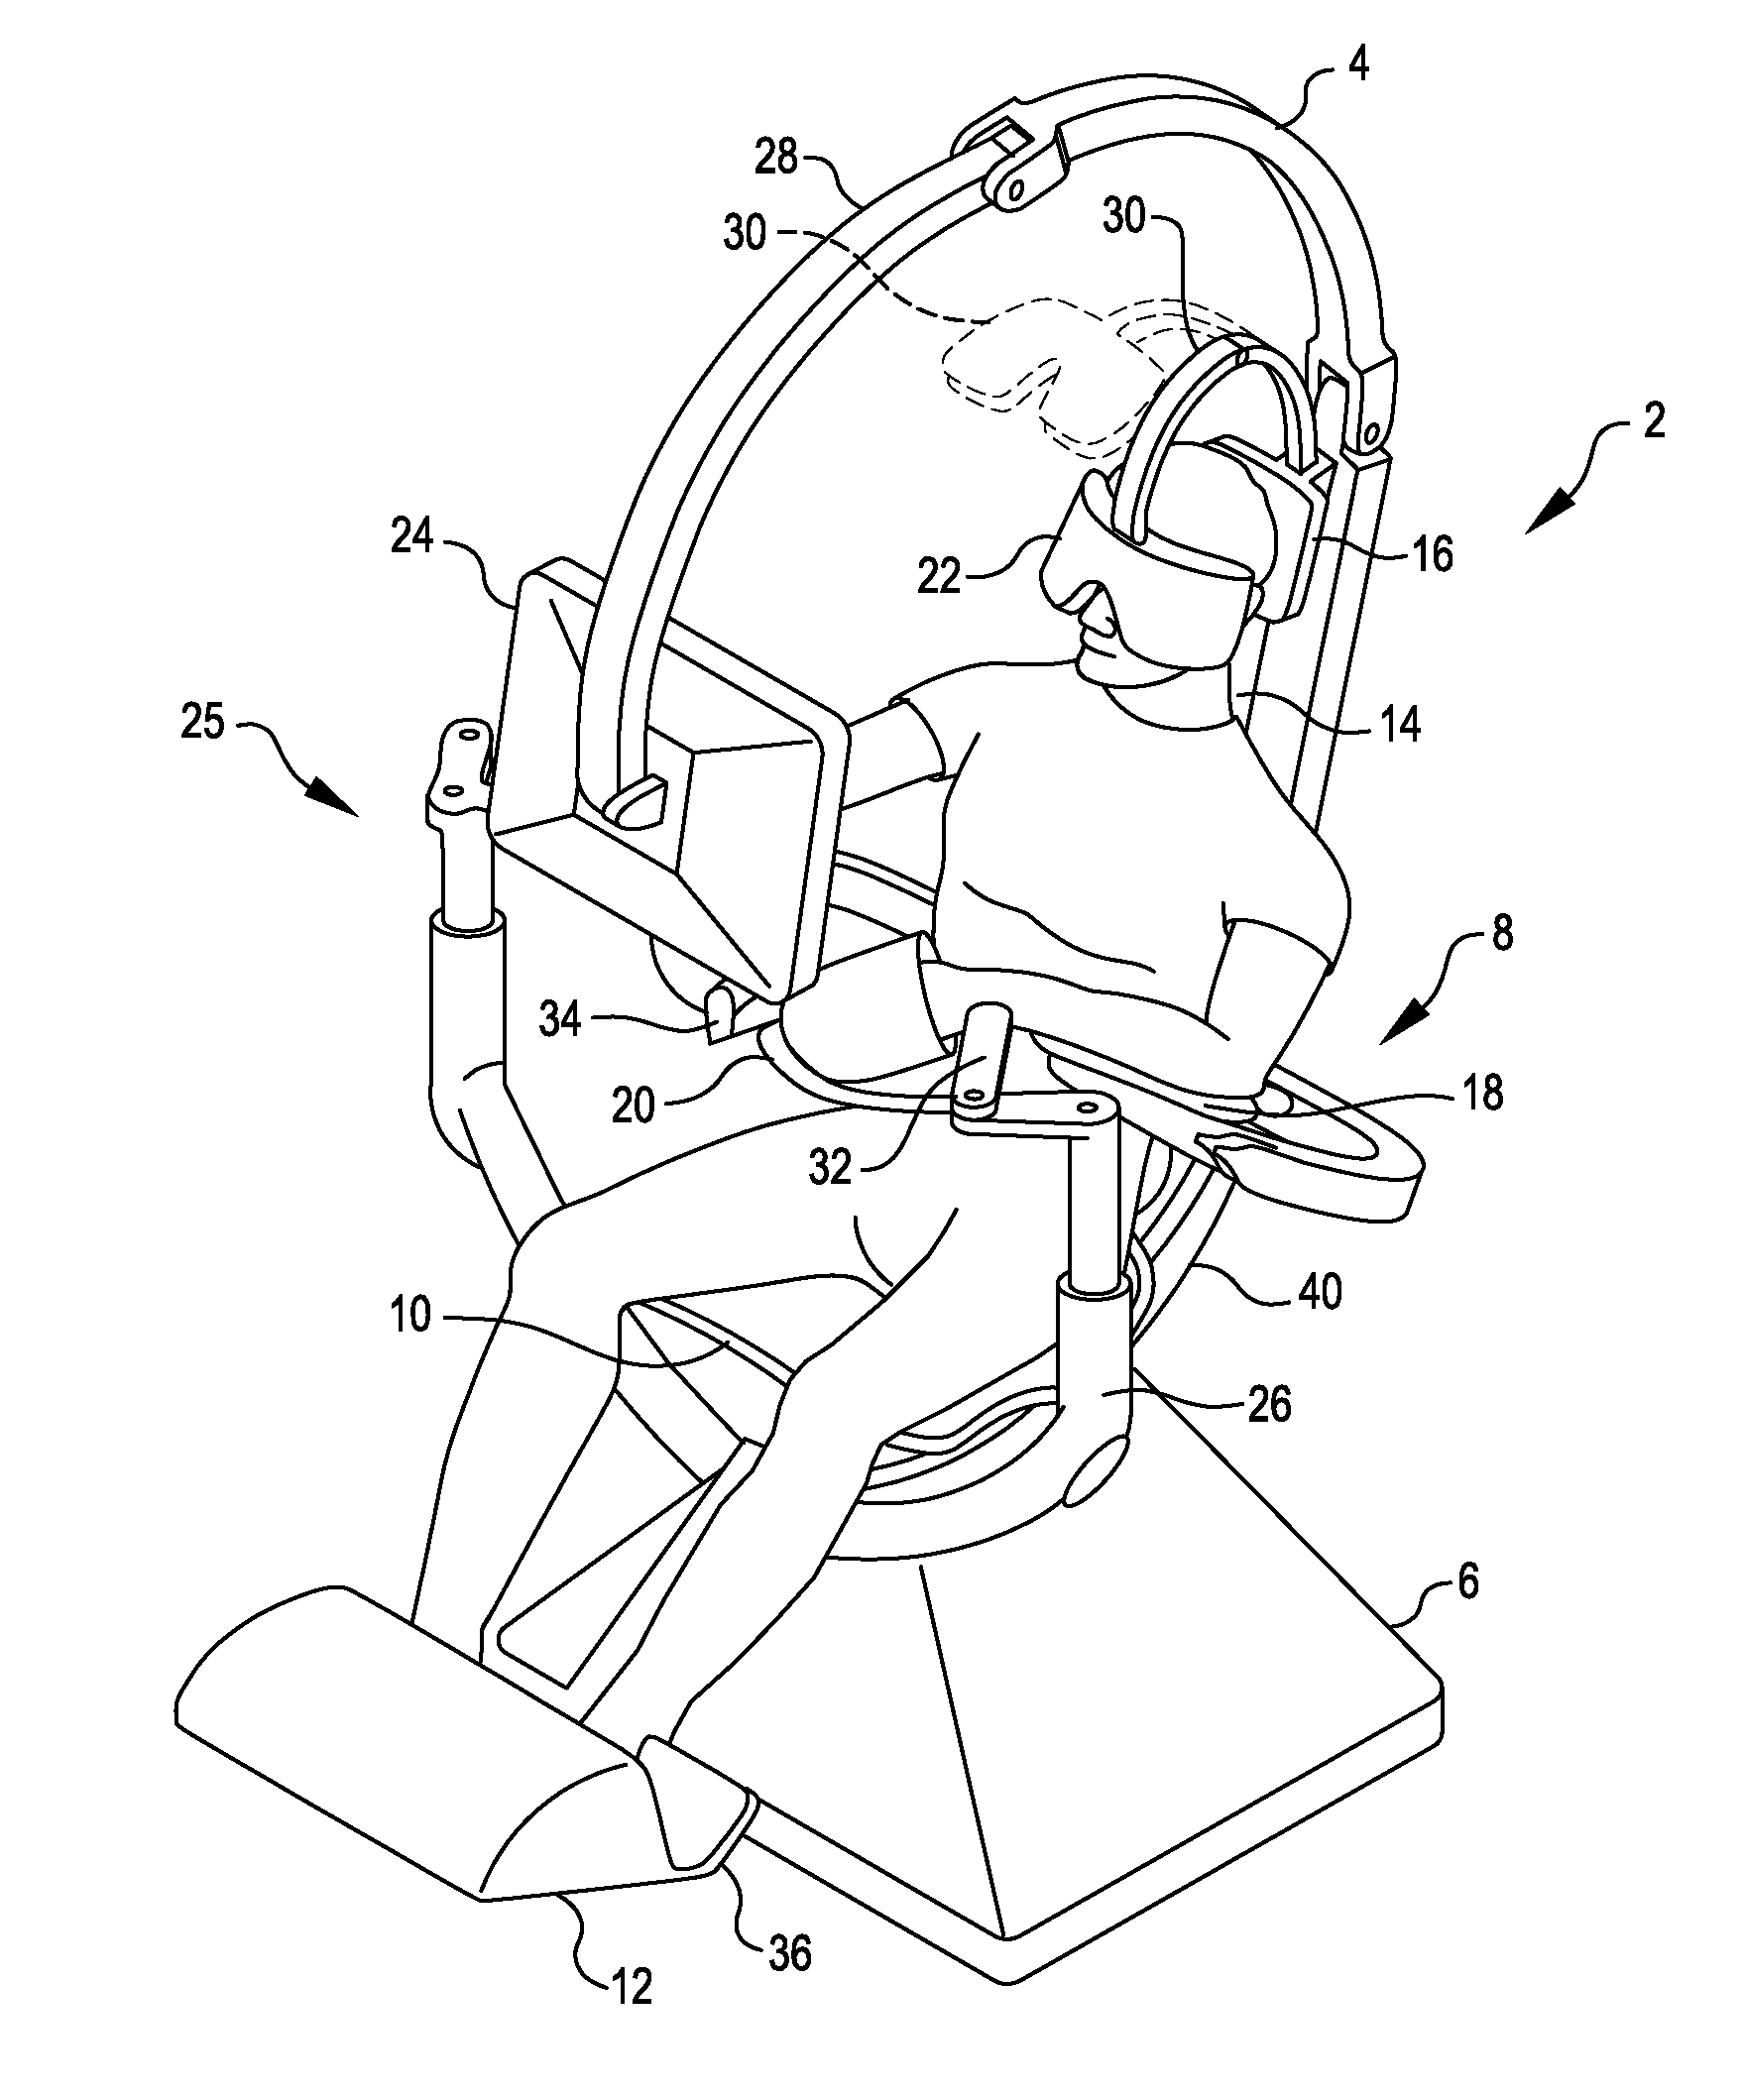 Surgical Cockpit Comprising Multisensory and Multimodal Interfaces for Robotic Surgery and Methods Related Thereto